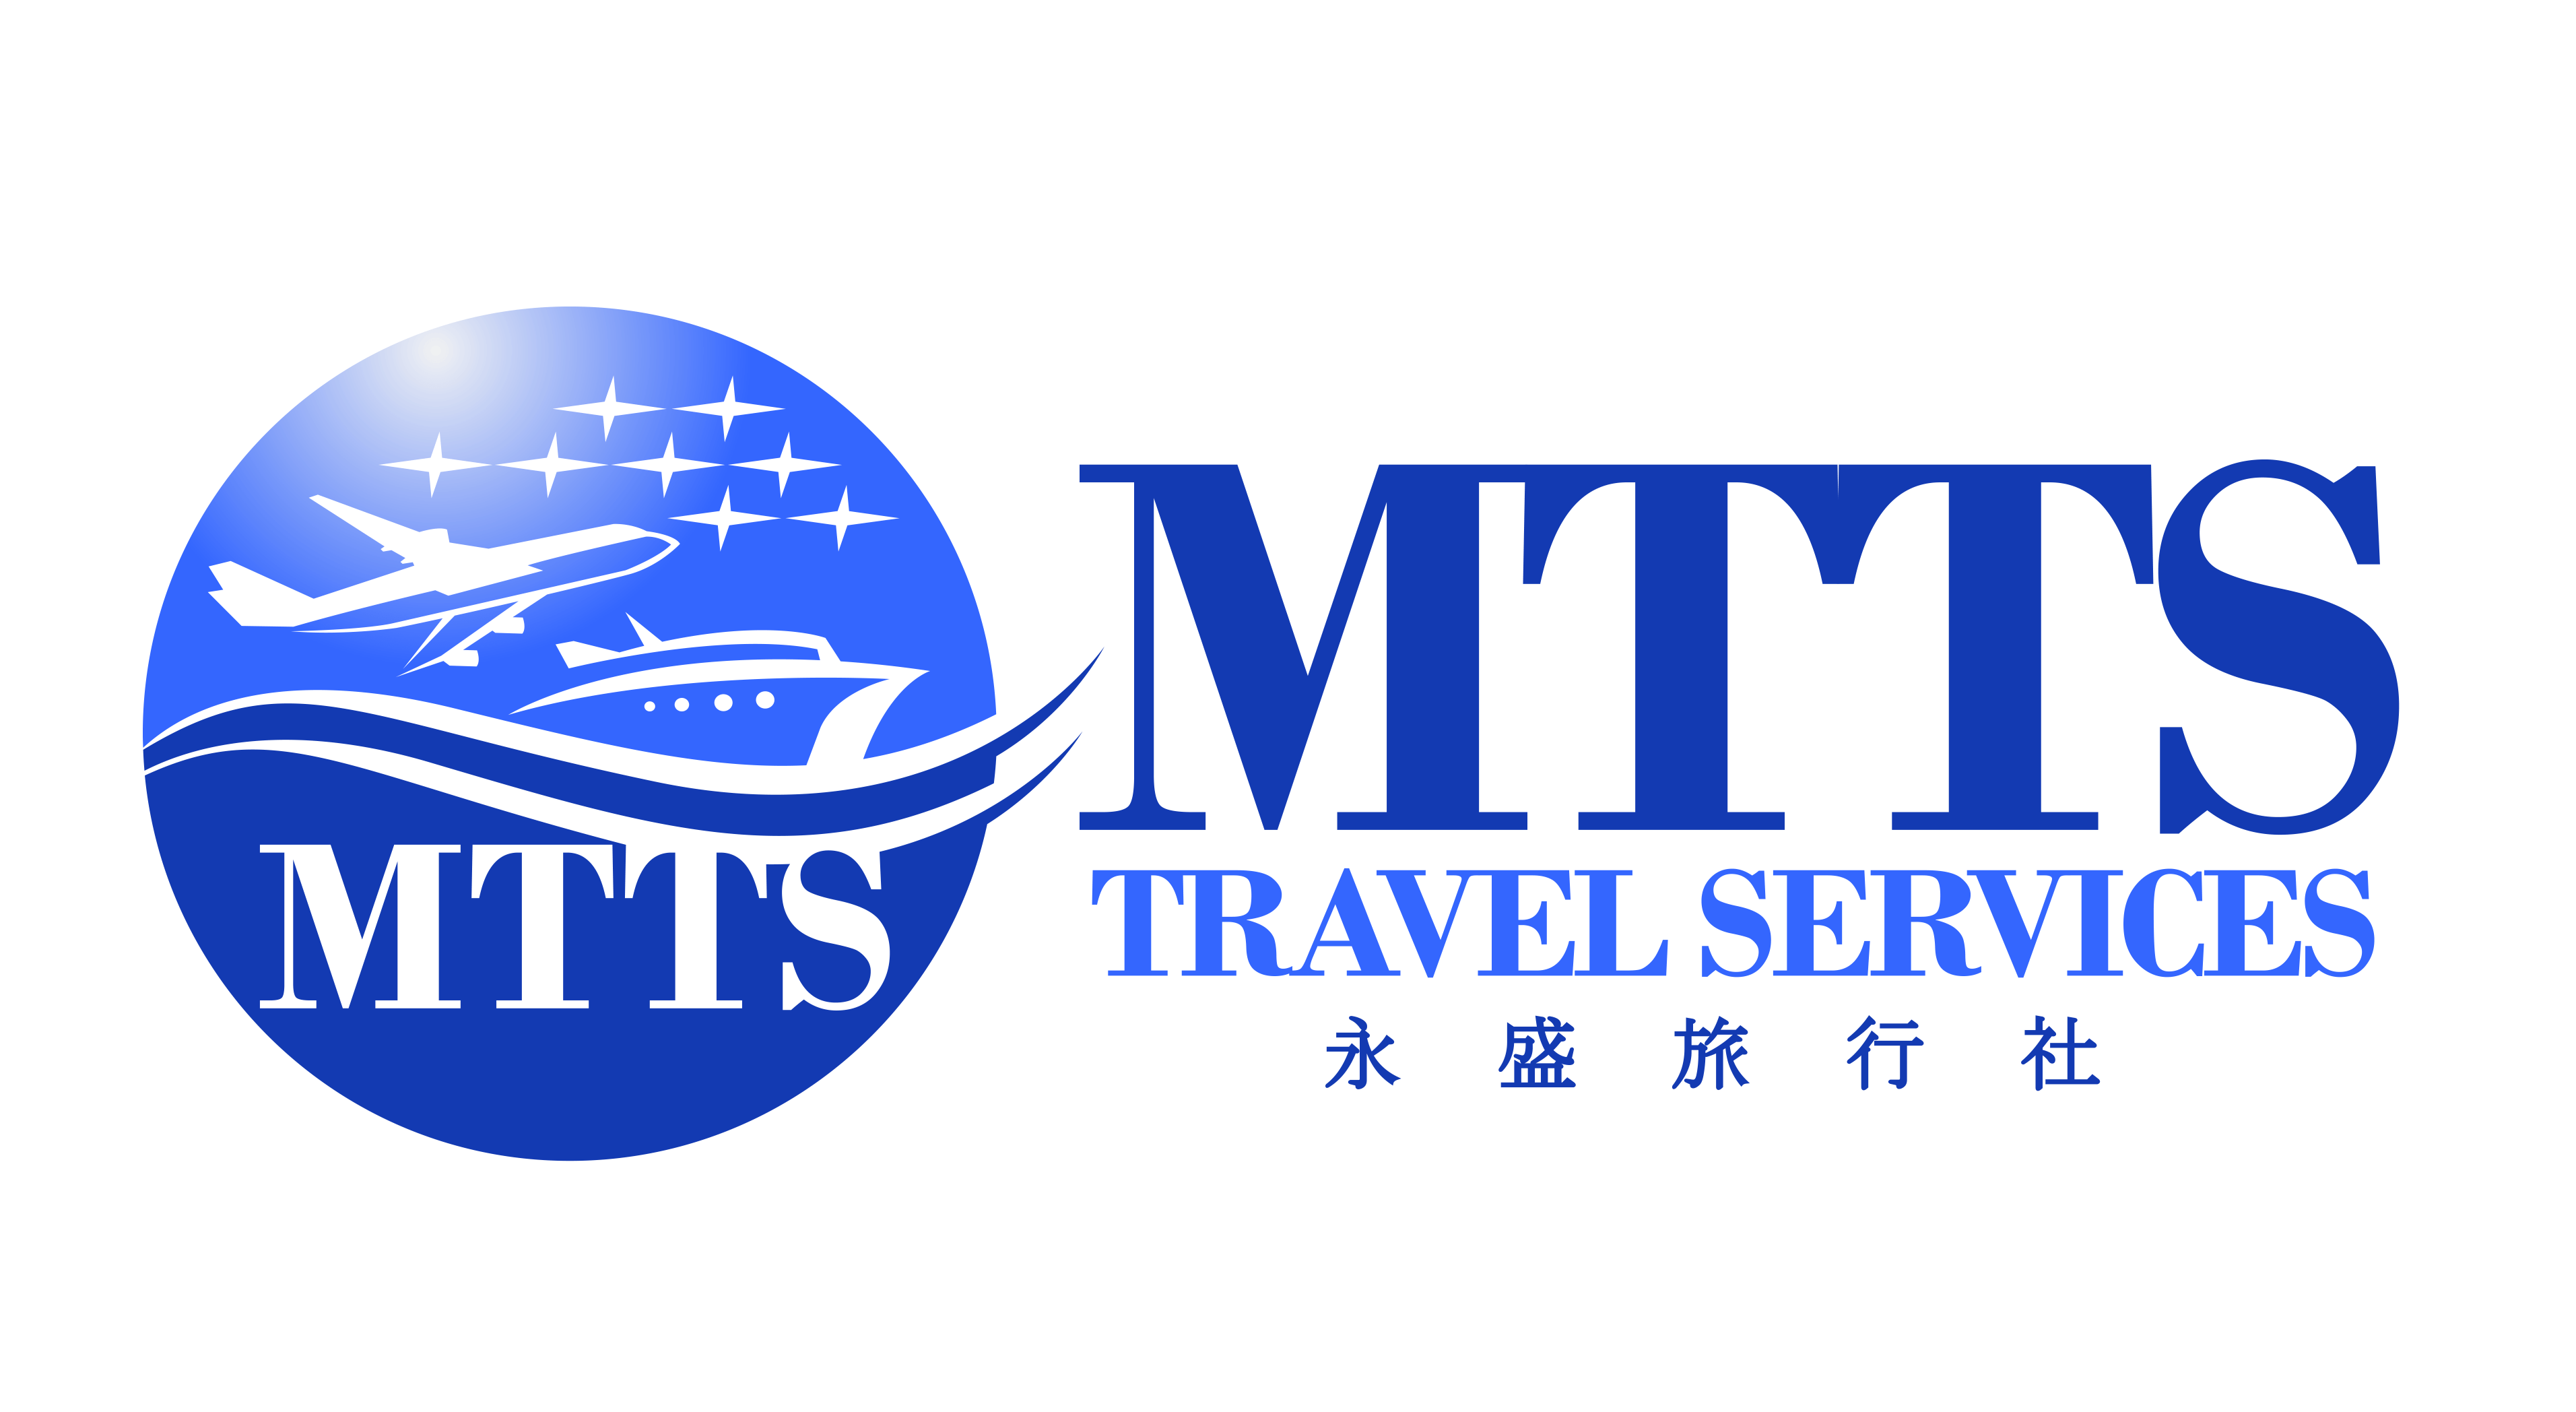 MTT-S Logo - MTTS TRAVEL SERVICES – Exceeds Expectations